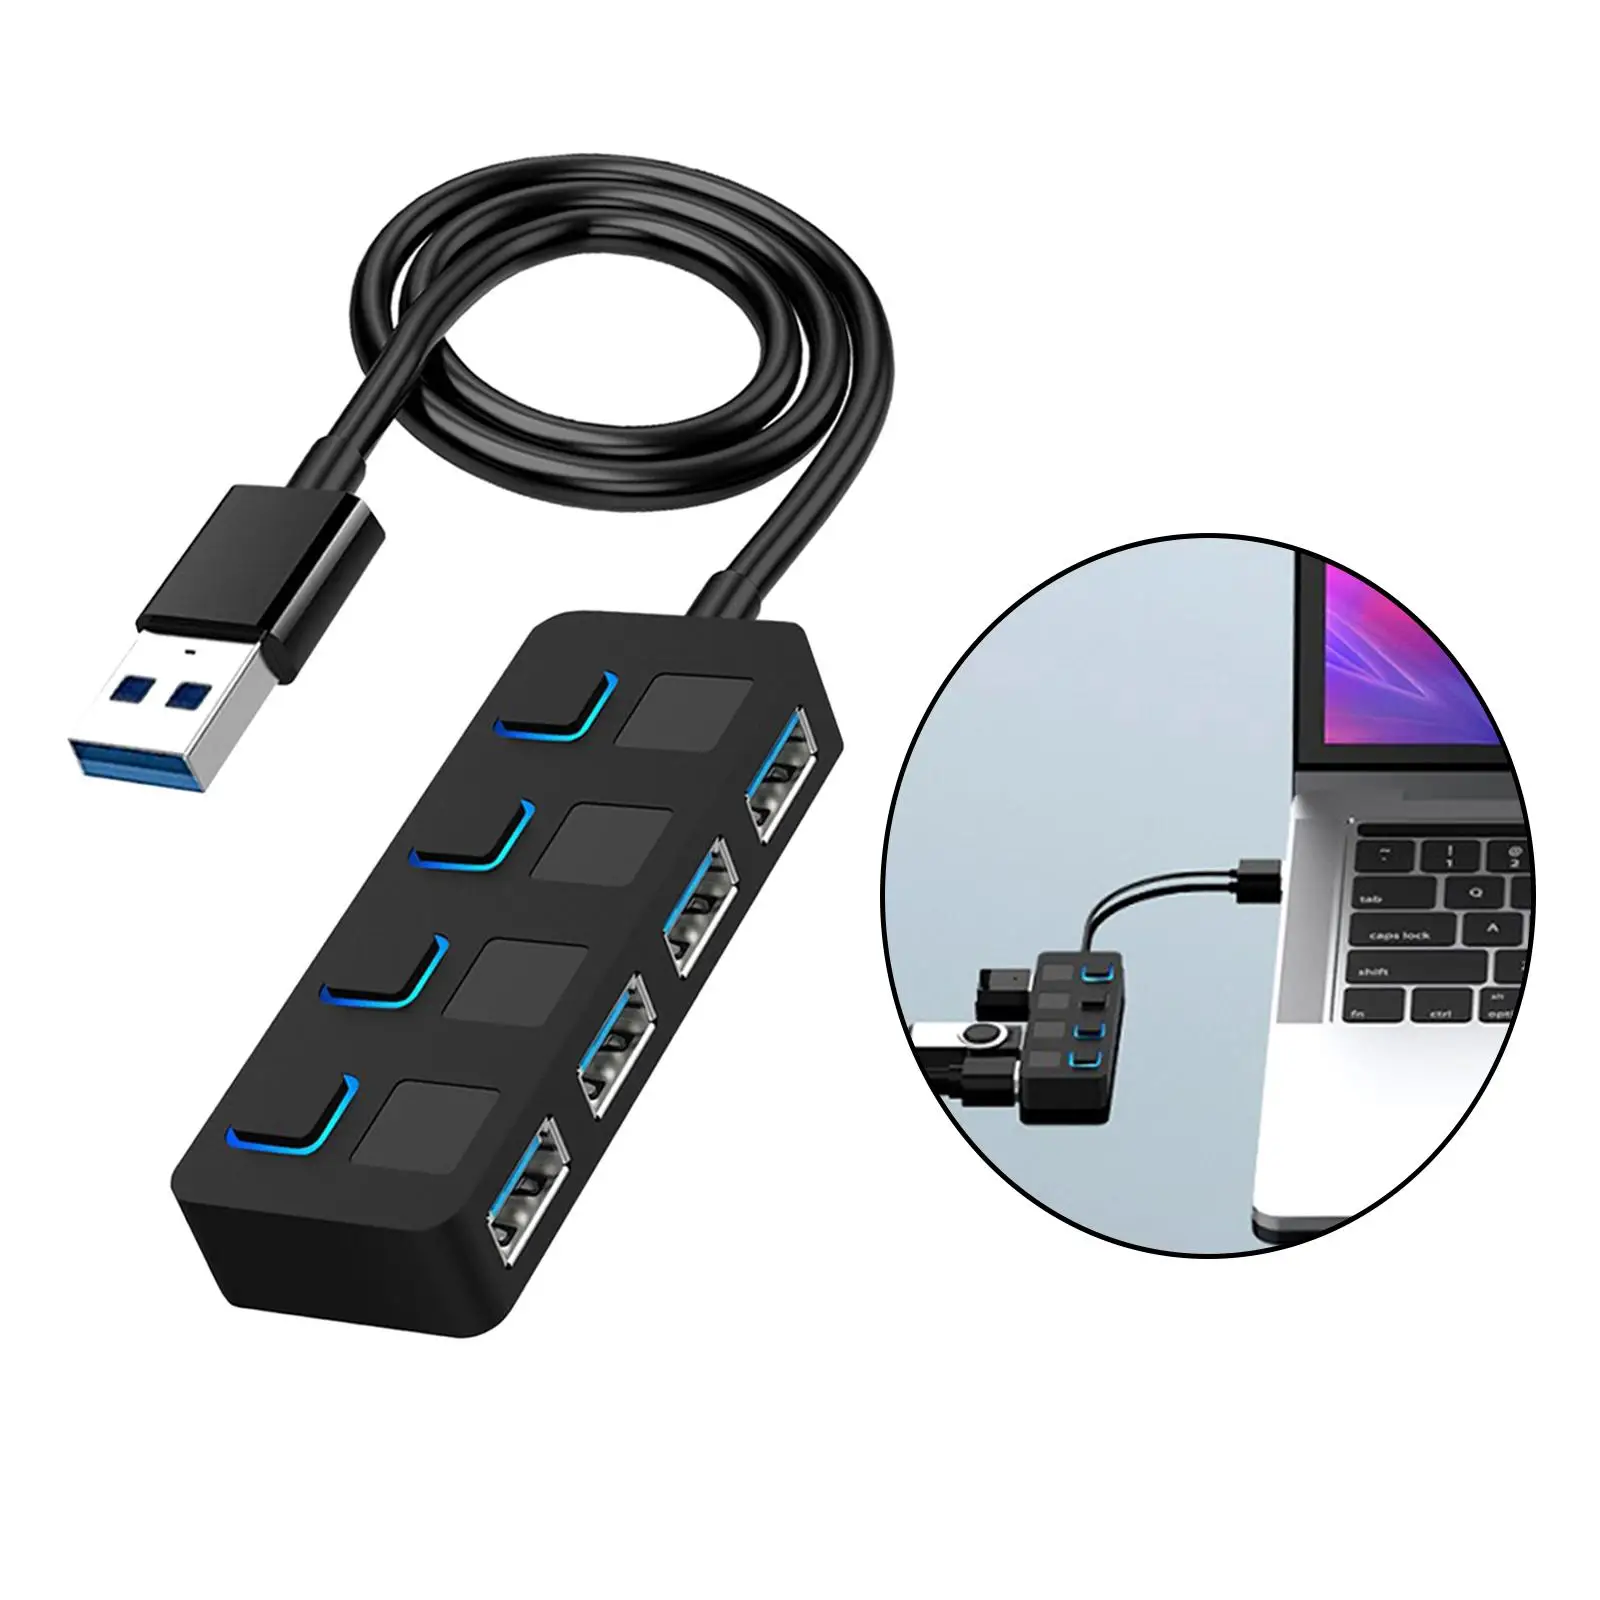  4 Ports USB 3.0 Hub, with Individual  Switches Portable Data USB Hub for for  for  (Charging Not Supported)